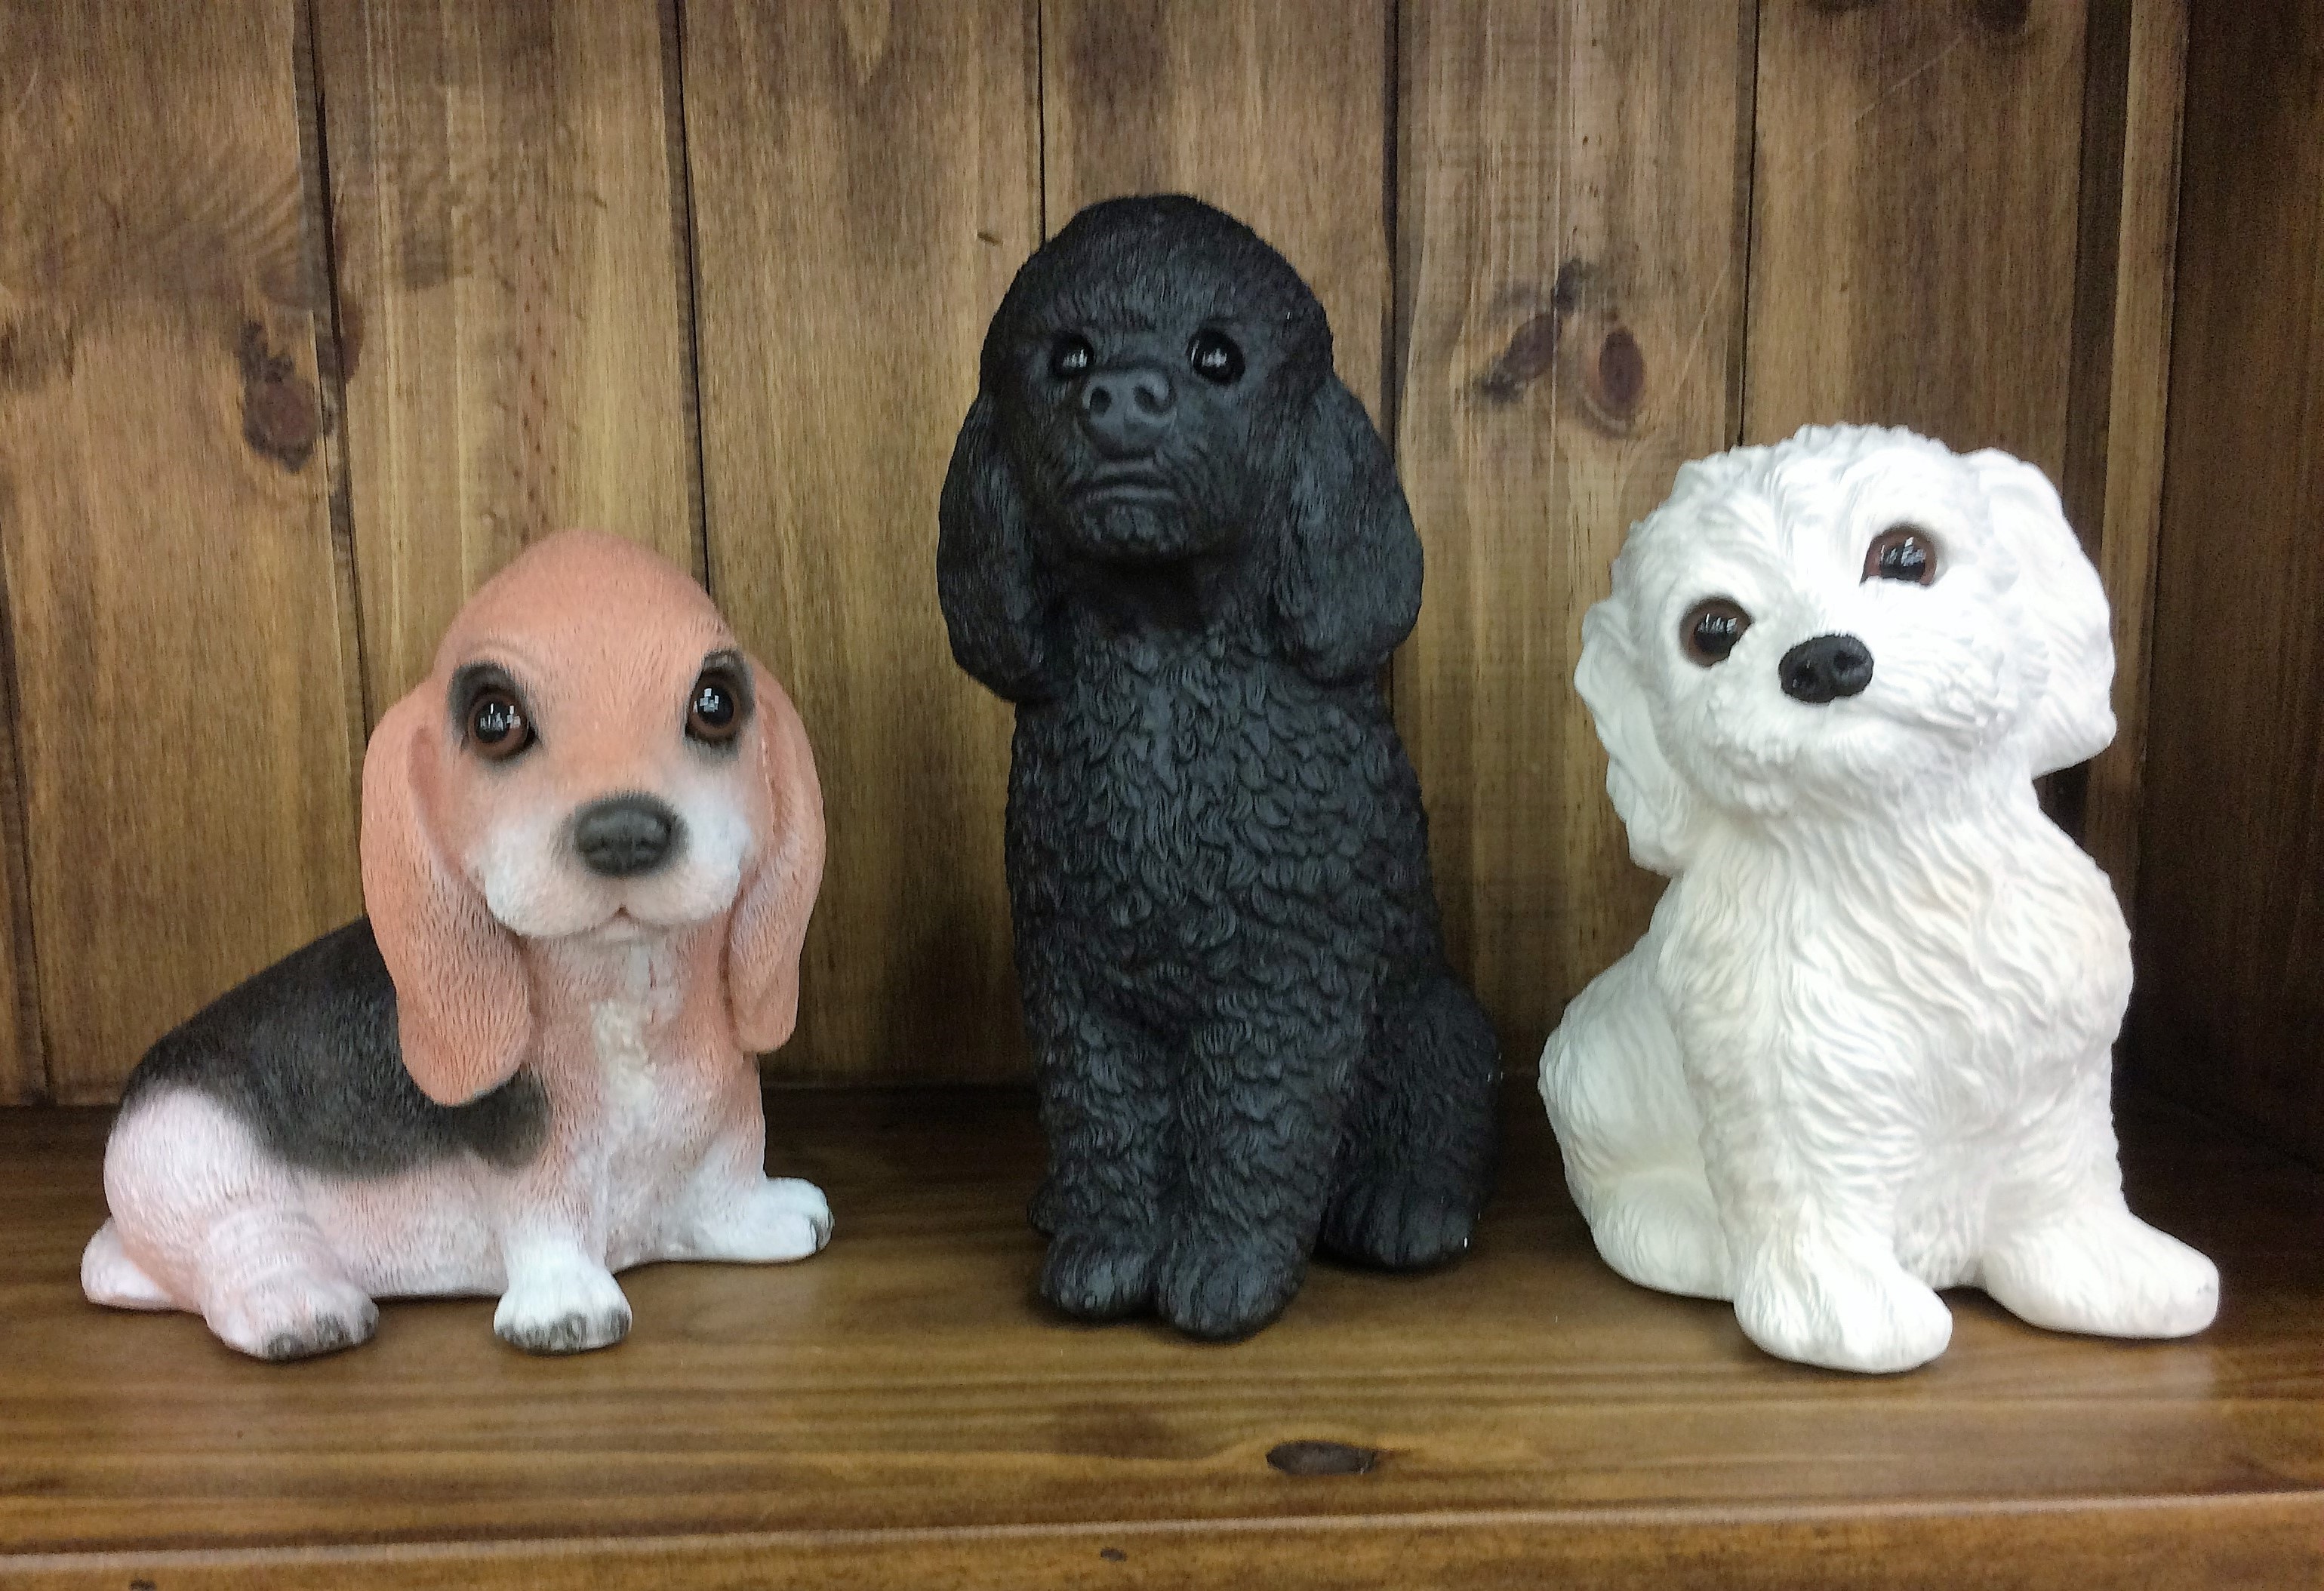 dog statues for sale at Rustler's Junction in Lampasas, TX